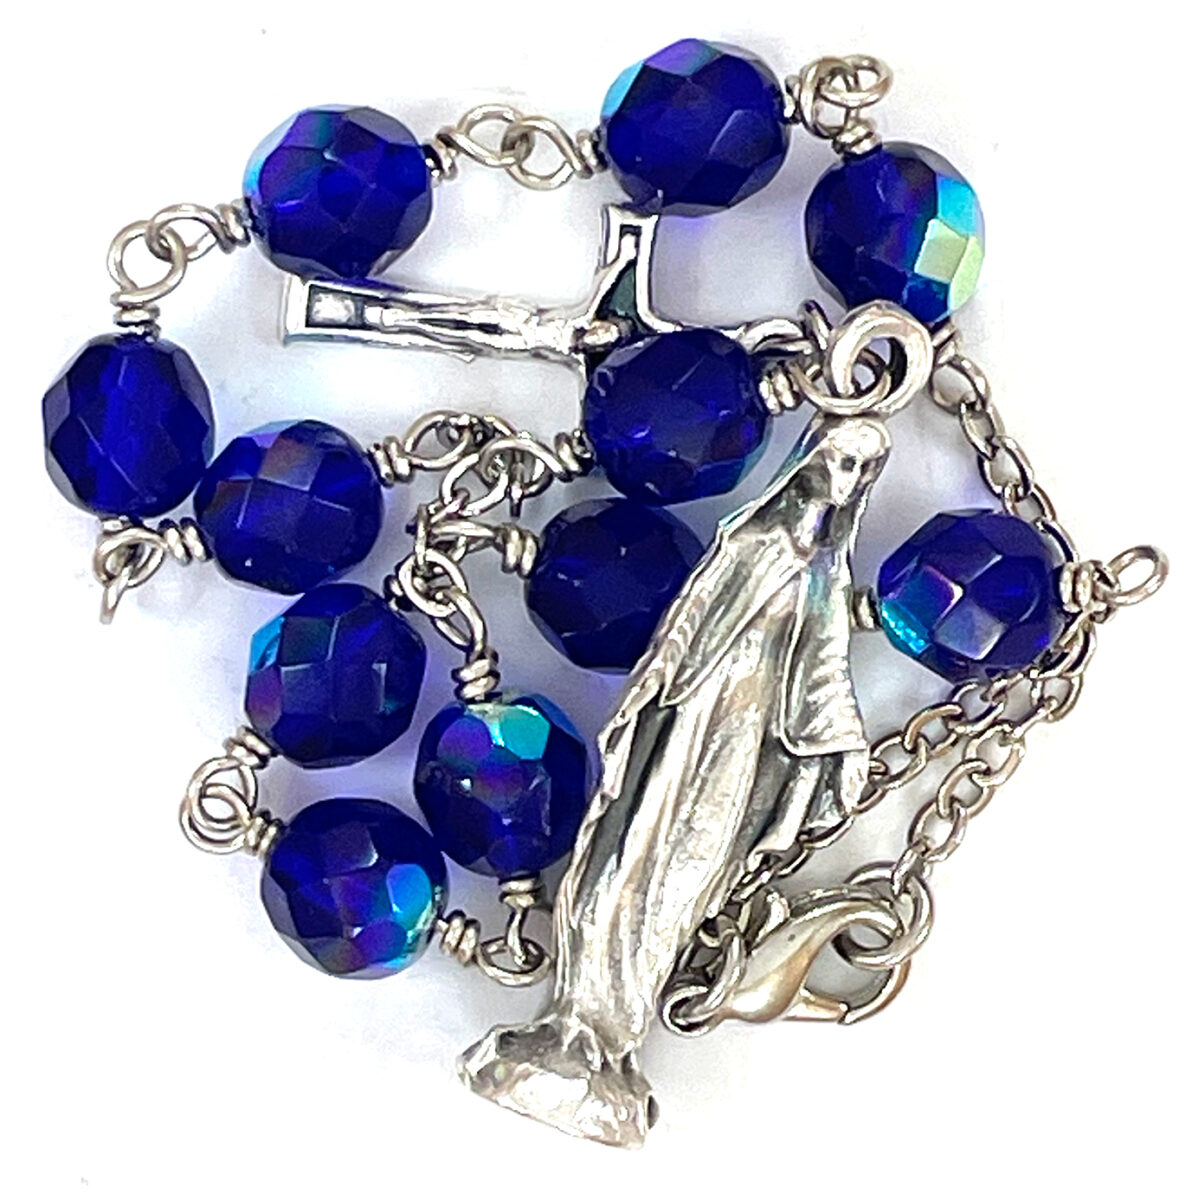 Our Lady of Grace Car Rosary ($10.99 CAD)